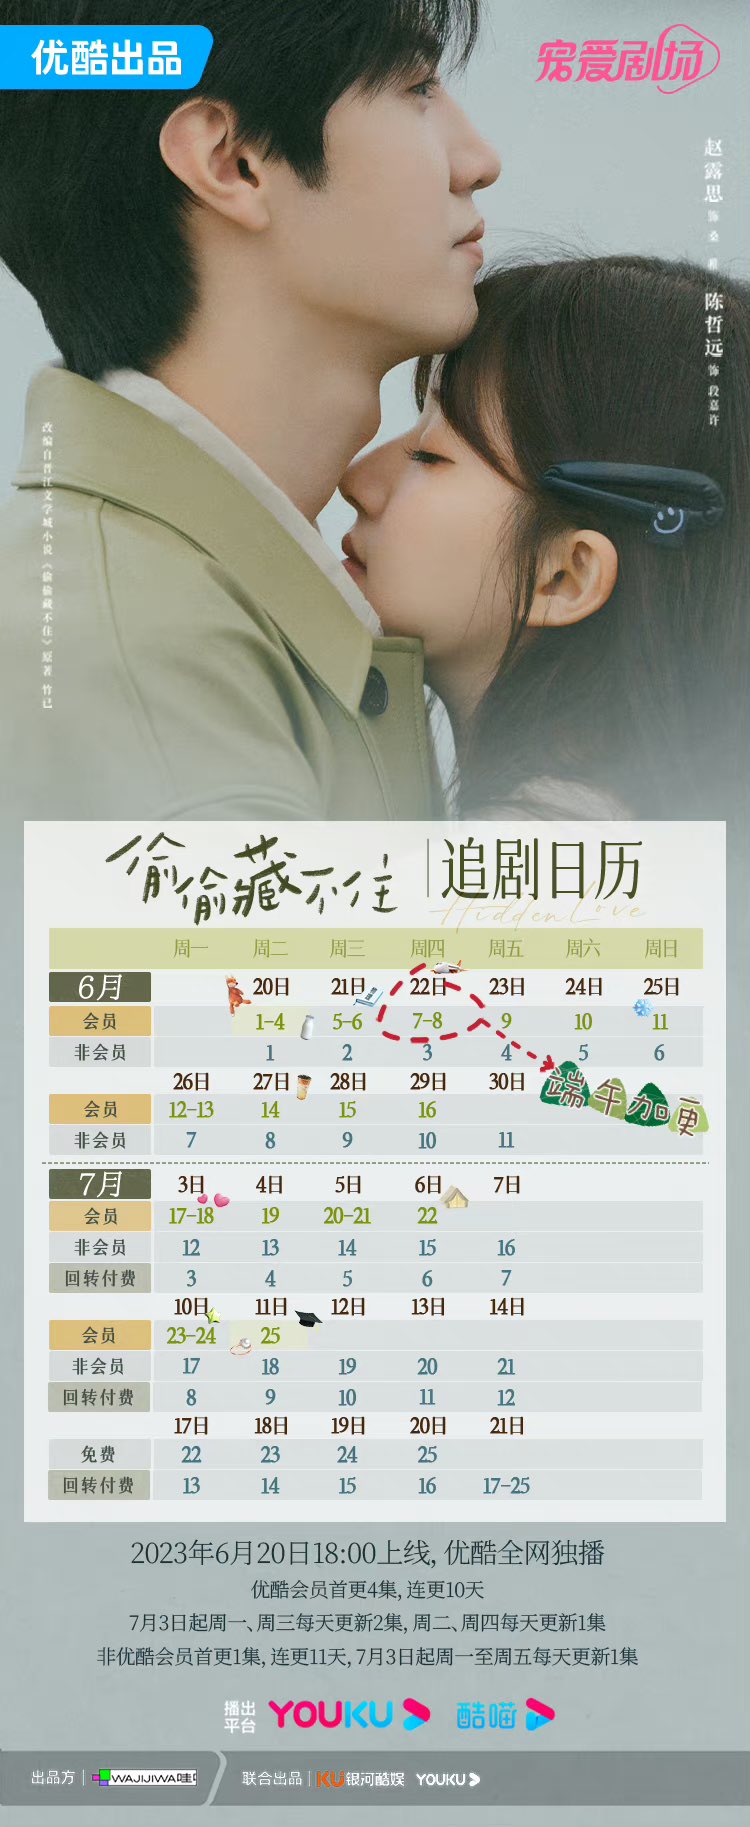 Hidden Love Ep 10 van on X: "@pinksinmyarea I'm not really sure they release 1 or sometimes 2  episodes. But below is the airing schedule for hidden love it's 2 eps on  monday and wednesday, 1